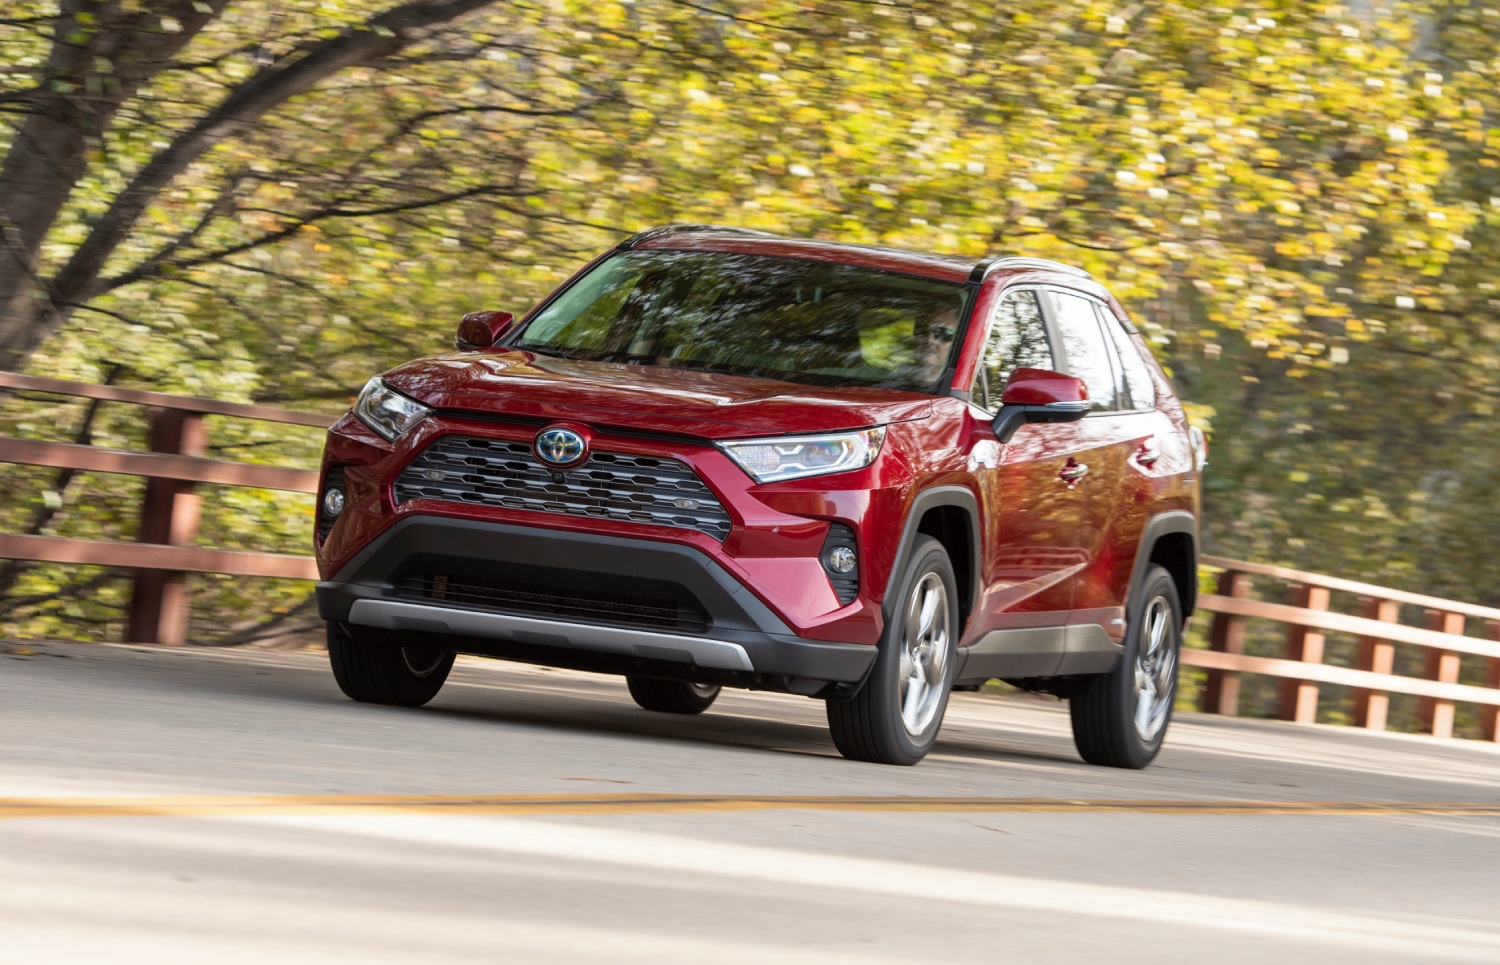 These Toyota trucks and SUVs under $40,000 include this RAV4